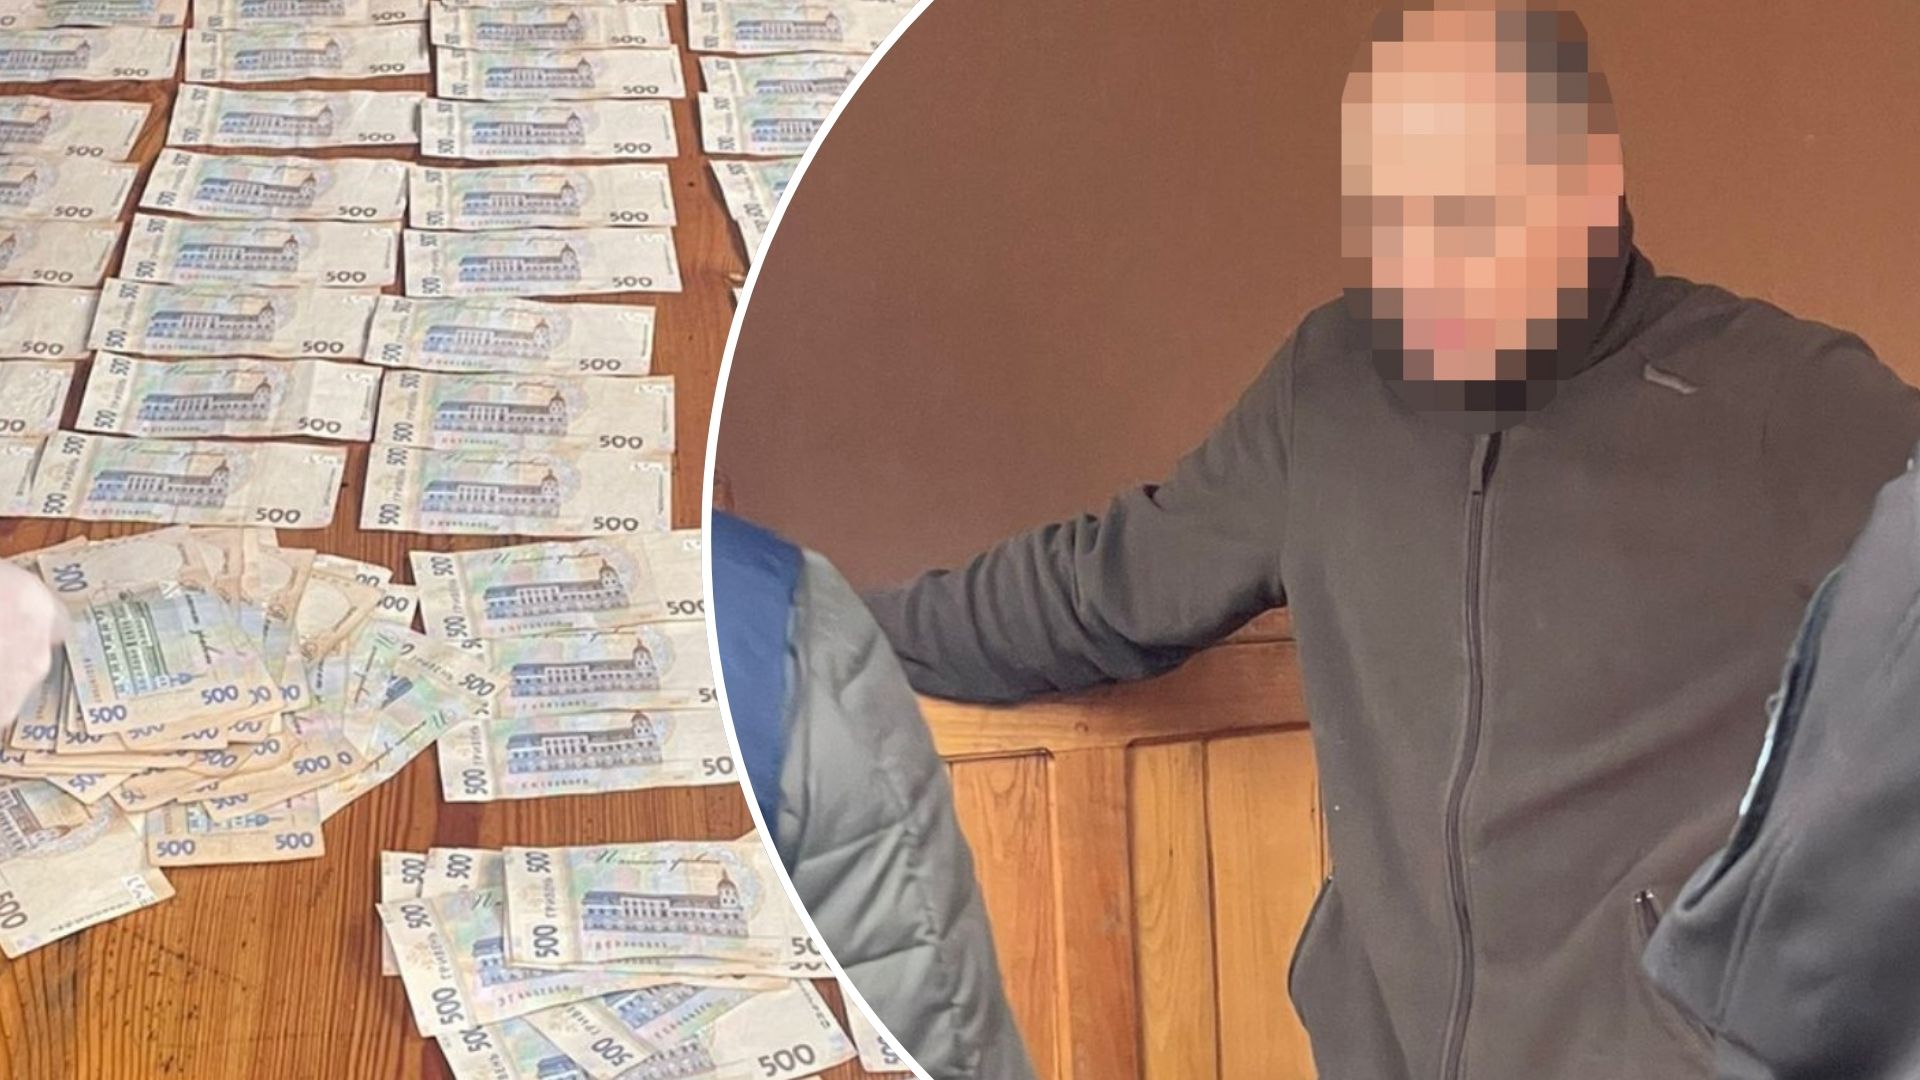 The Zakarpattia Regional Prosecutor's Office served a notice of suspicion to the forester of the Svalyava Forestry branch of extortion and receipt of illegal benefits (Part 3 of Article 368 of the Criminal Code of Ukraine).